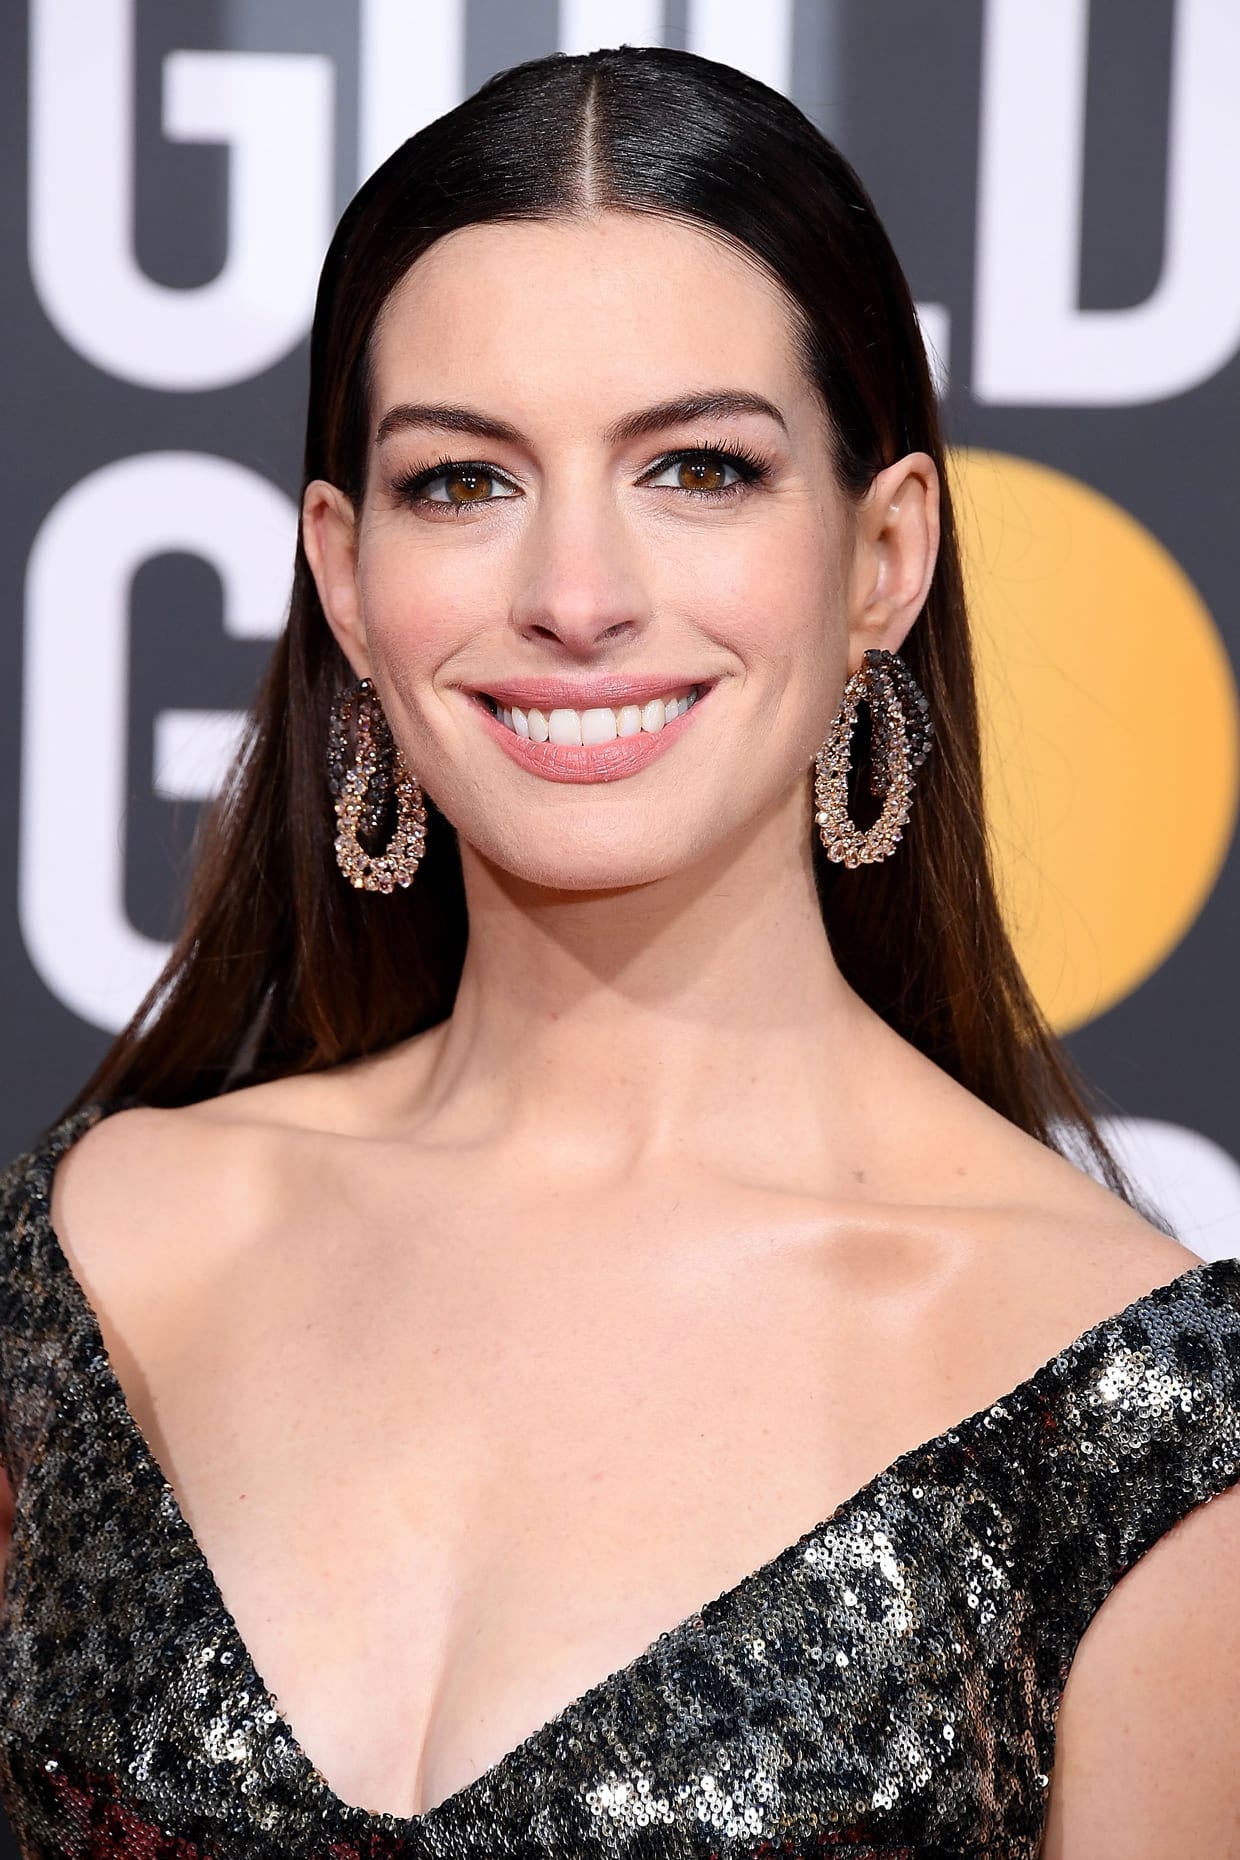 Anne Hathaway attends the 76th Annual Golden Globe Awards at The Beverly Hilton Hotel, Jan. 6, 2019, Beverly Hills, California.